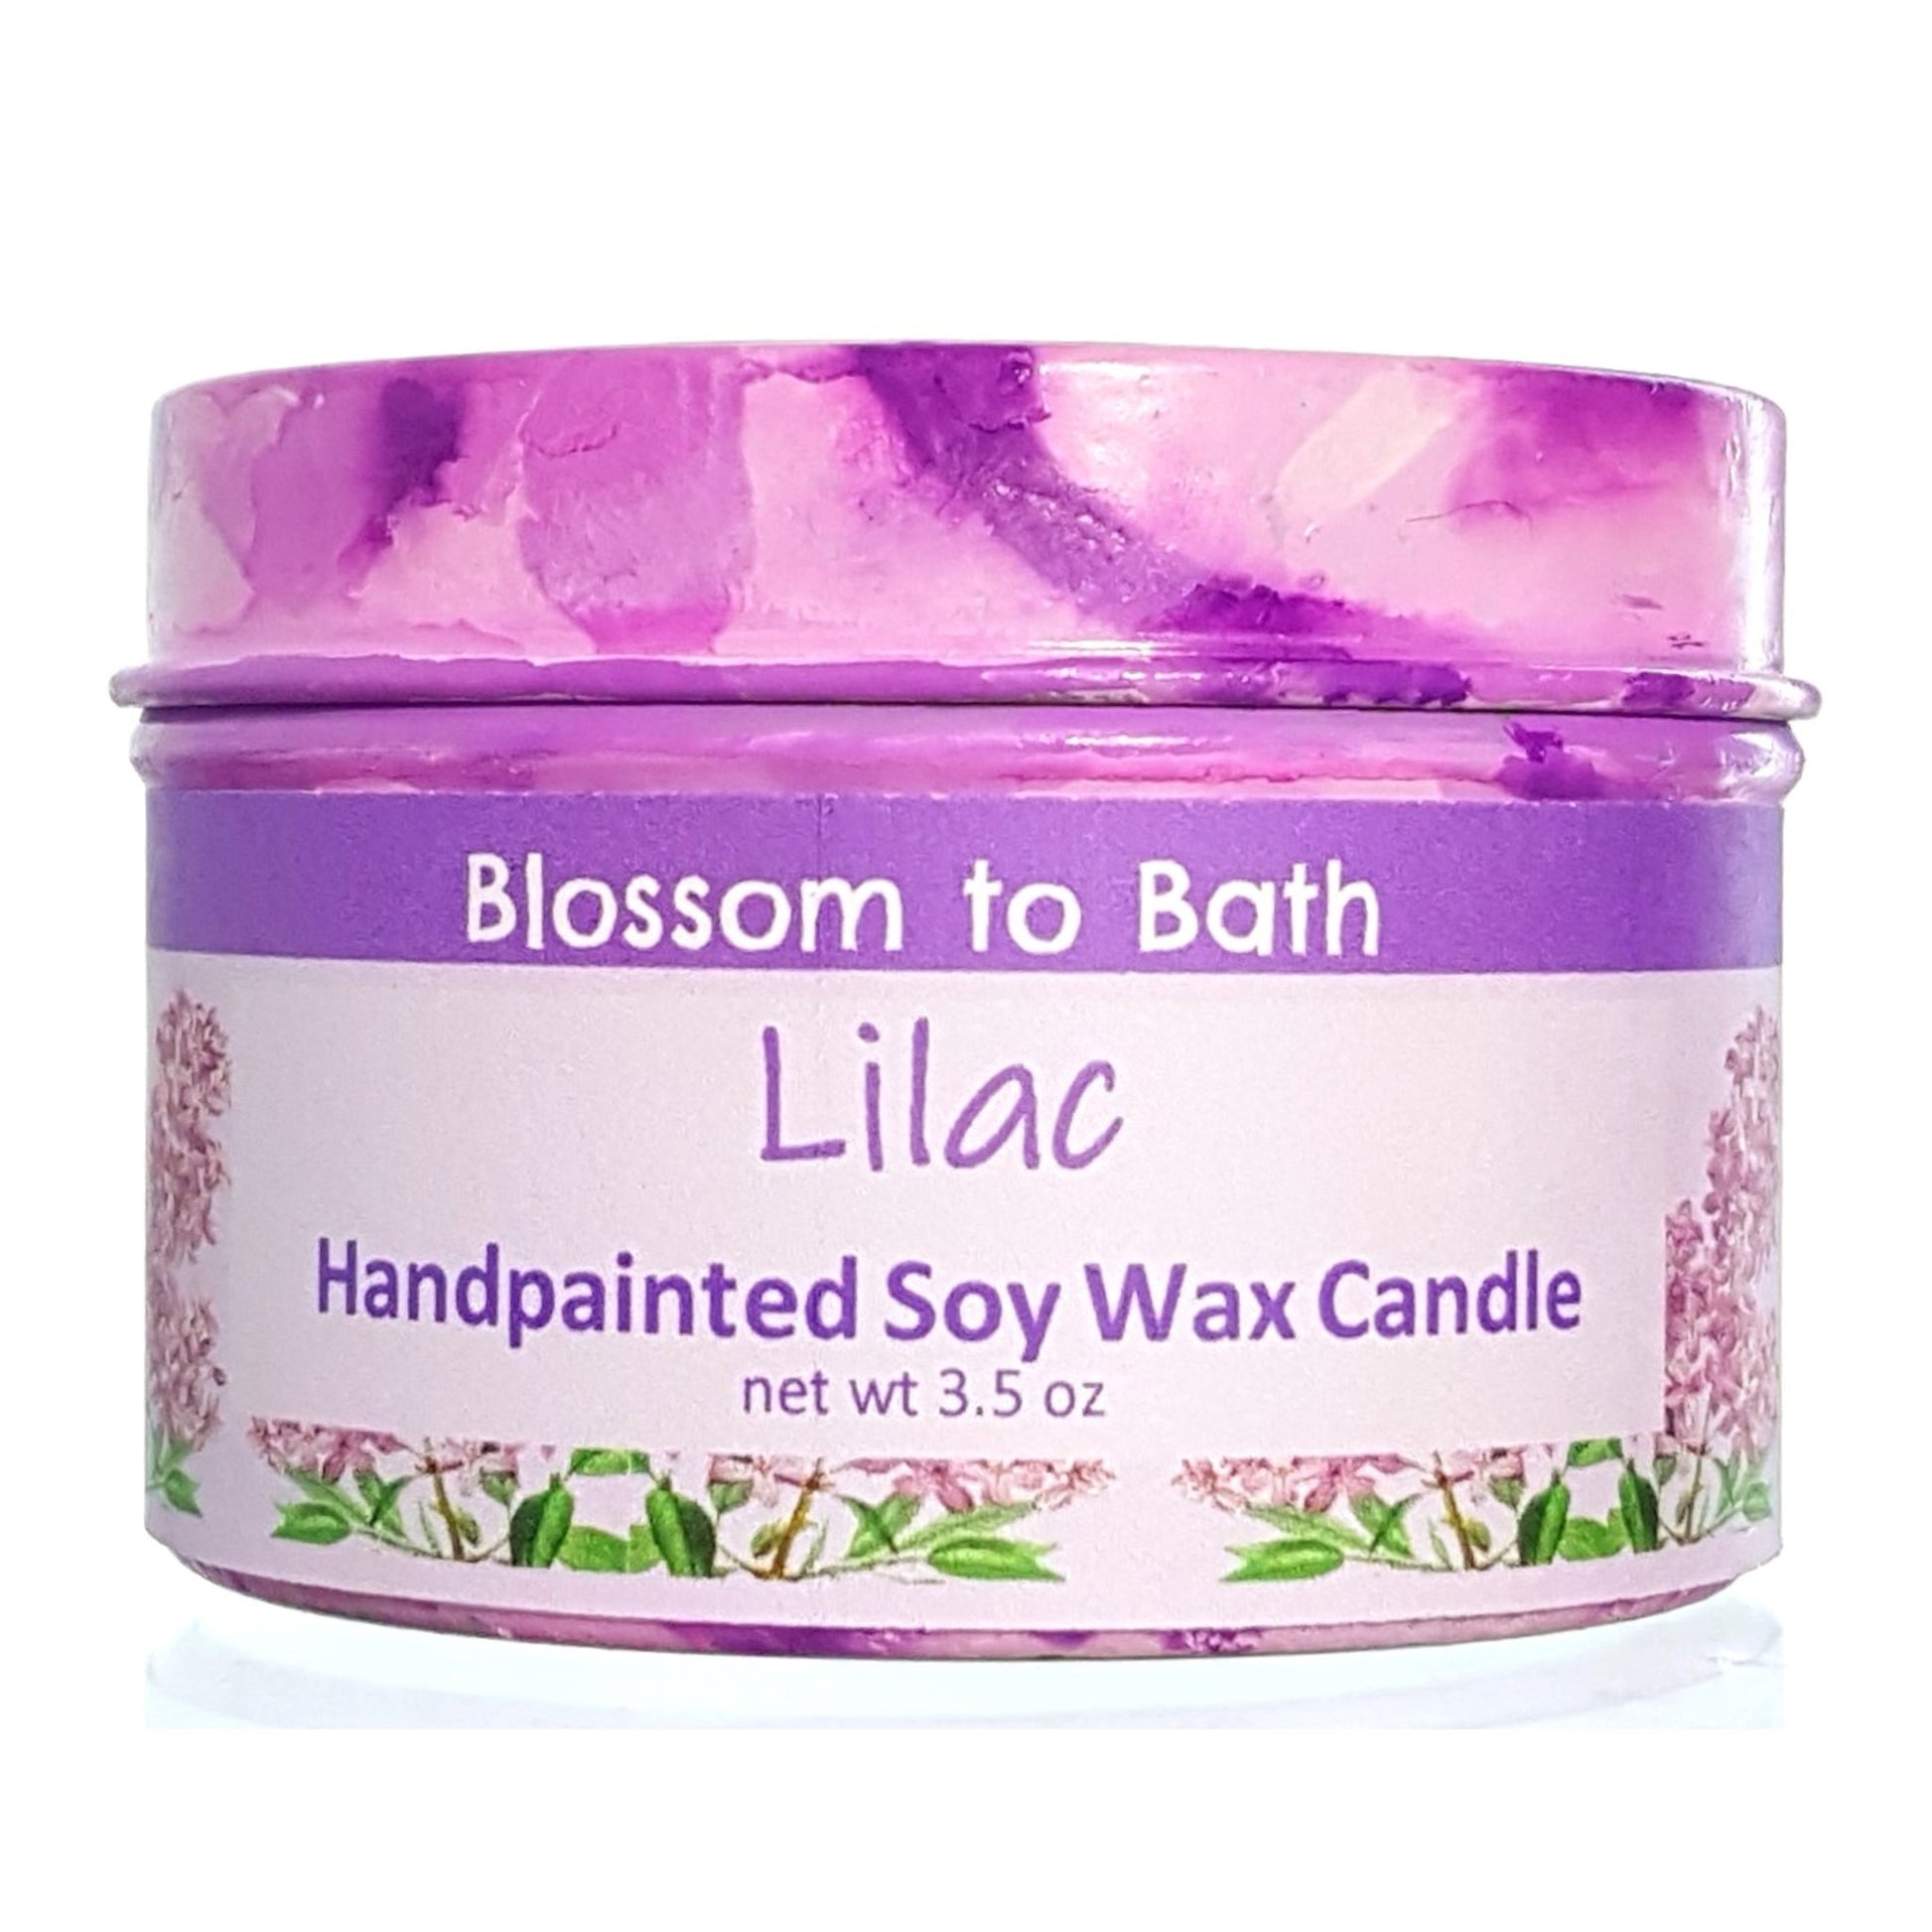 Buy Blossom to Bath Lilac Handpainted Soy Wax Candle from Flowersong Soap Studio.  Enjoy one of a kind décor and fill the air with a charming fragrance that lasts for hours  The scent of a freshly blooming lilac bush, the embodiment of spring flowers.